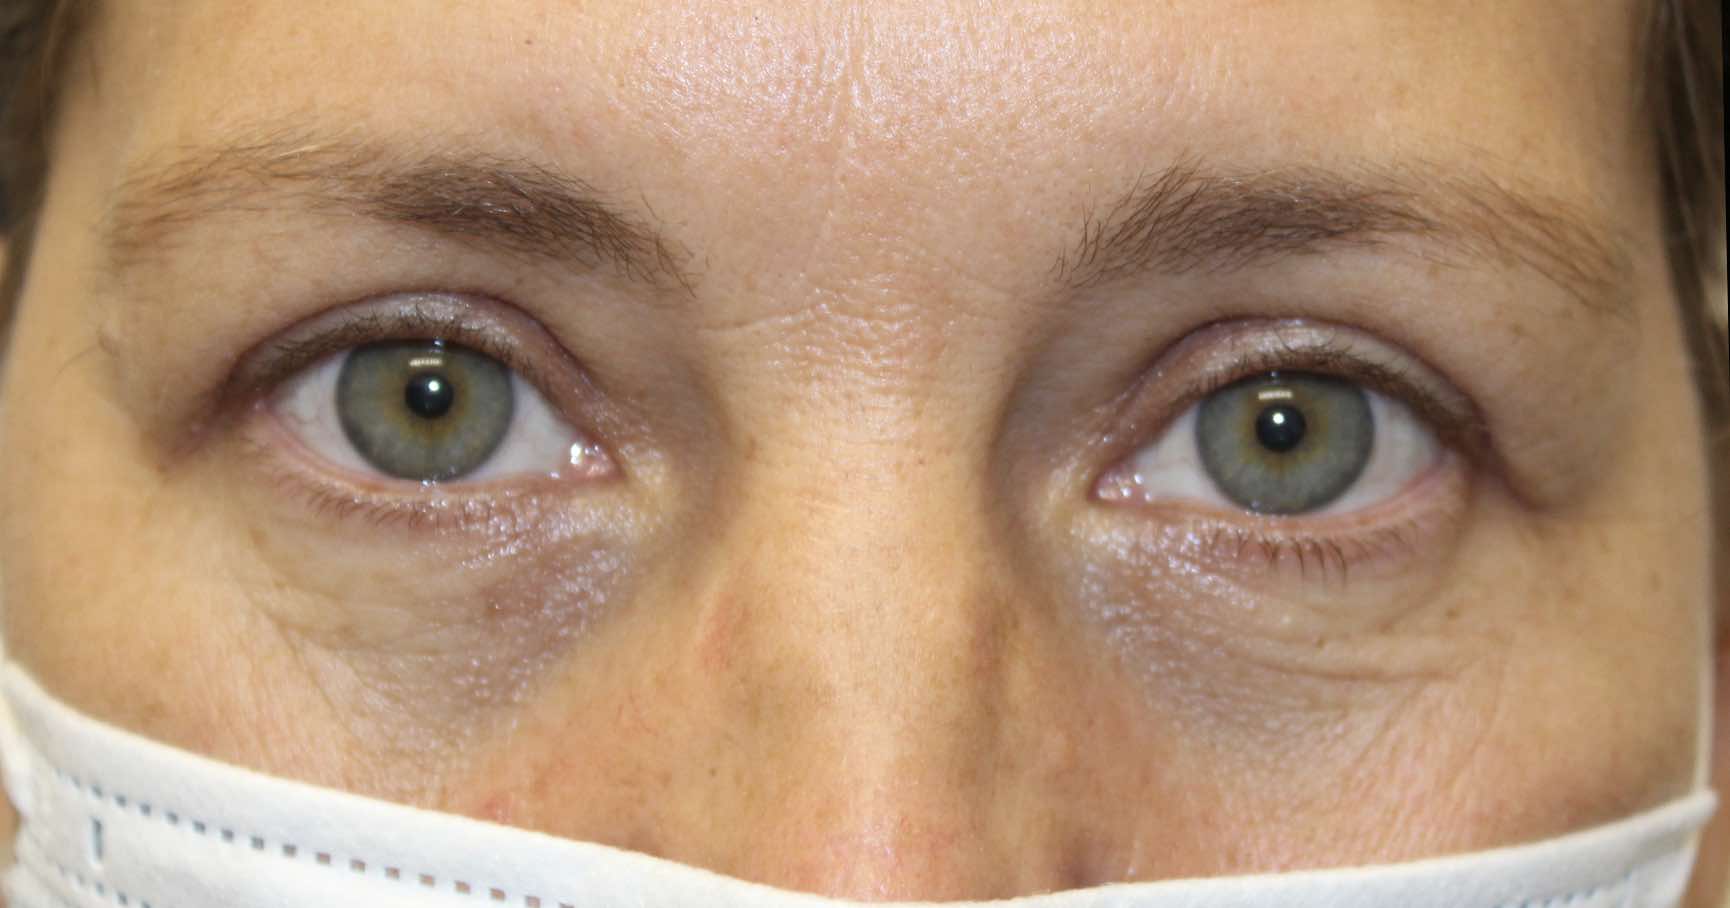 50 year old woman after blepharoplasty upper eye surgery